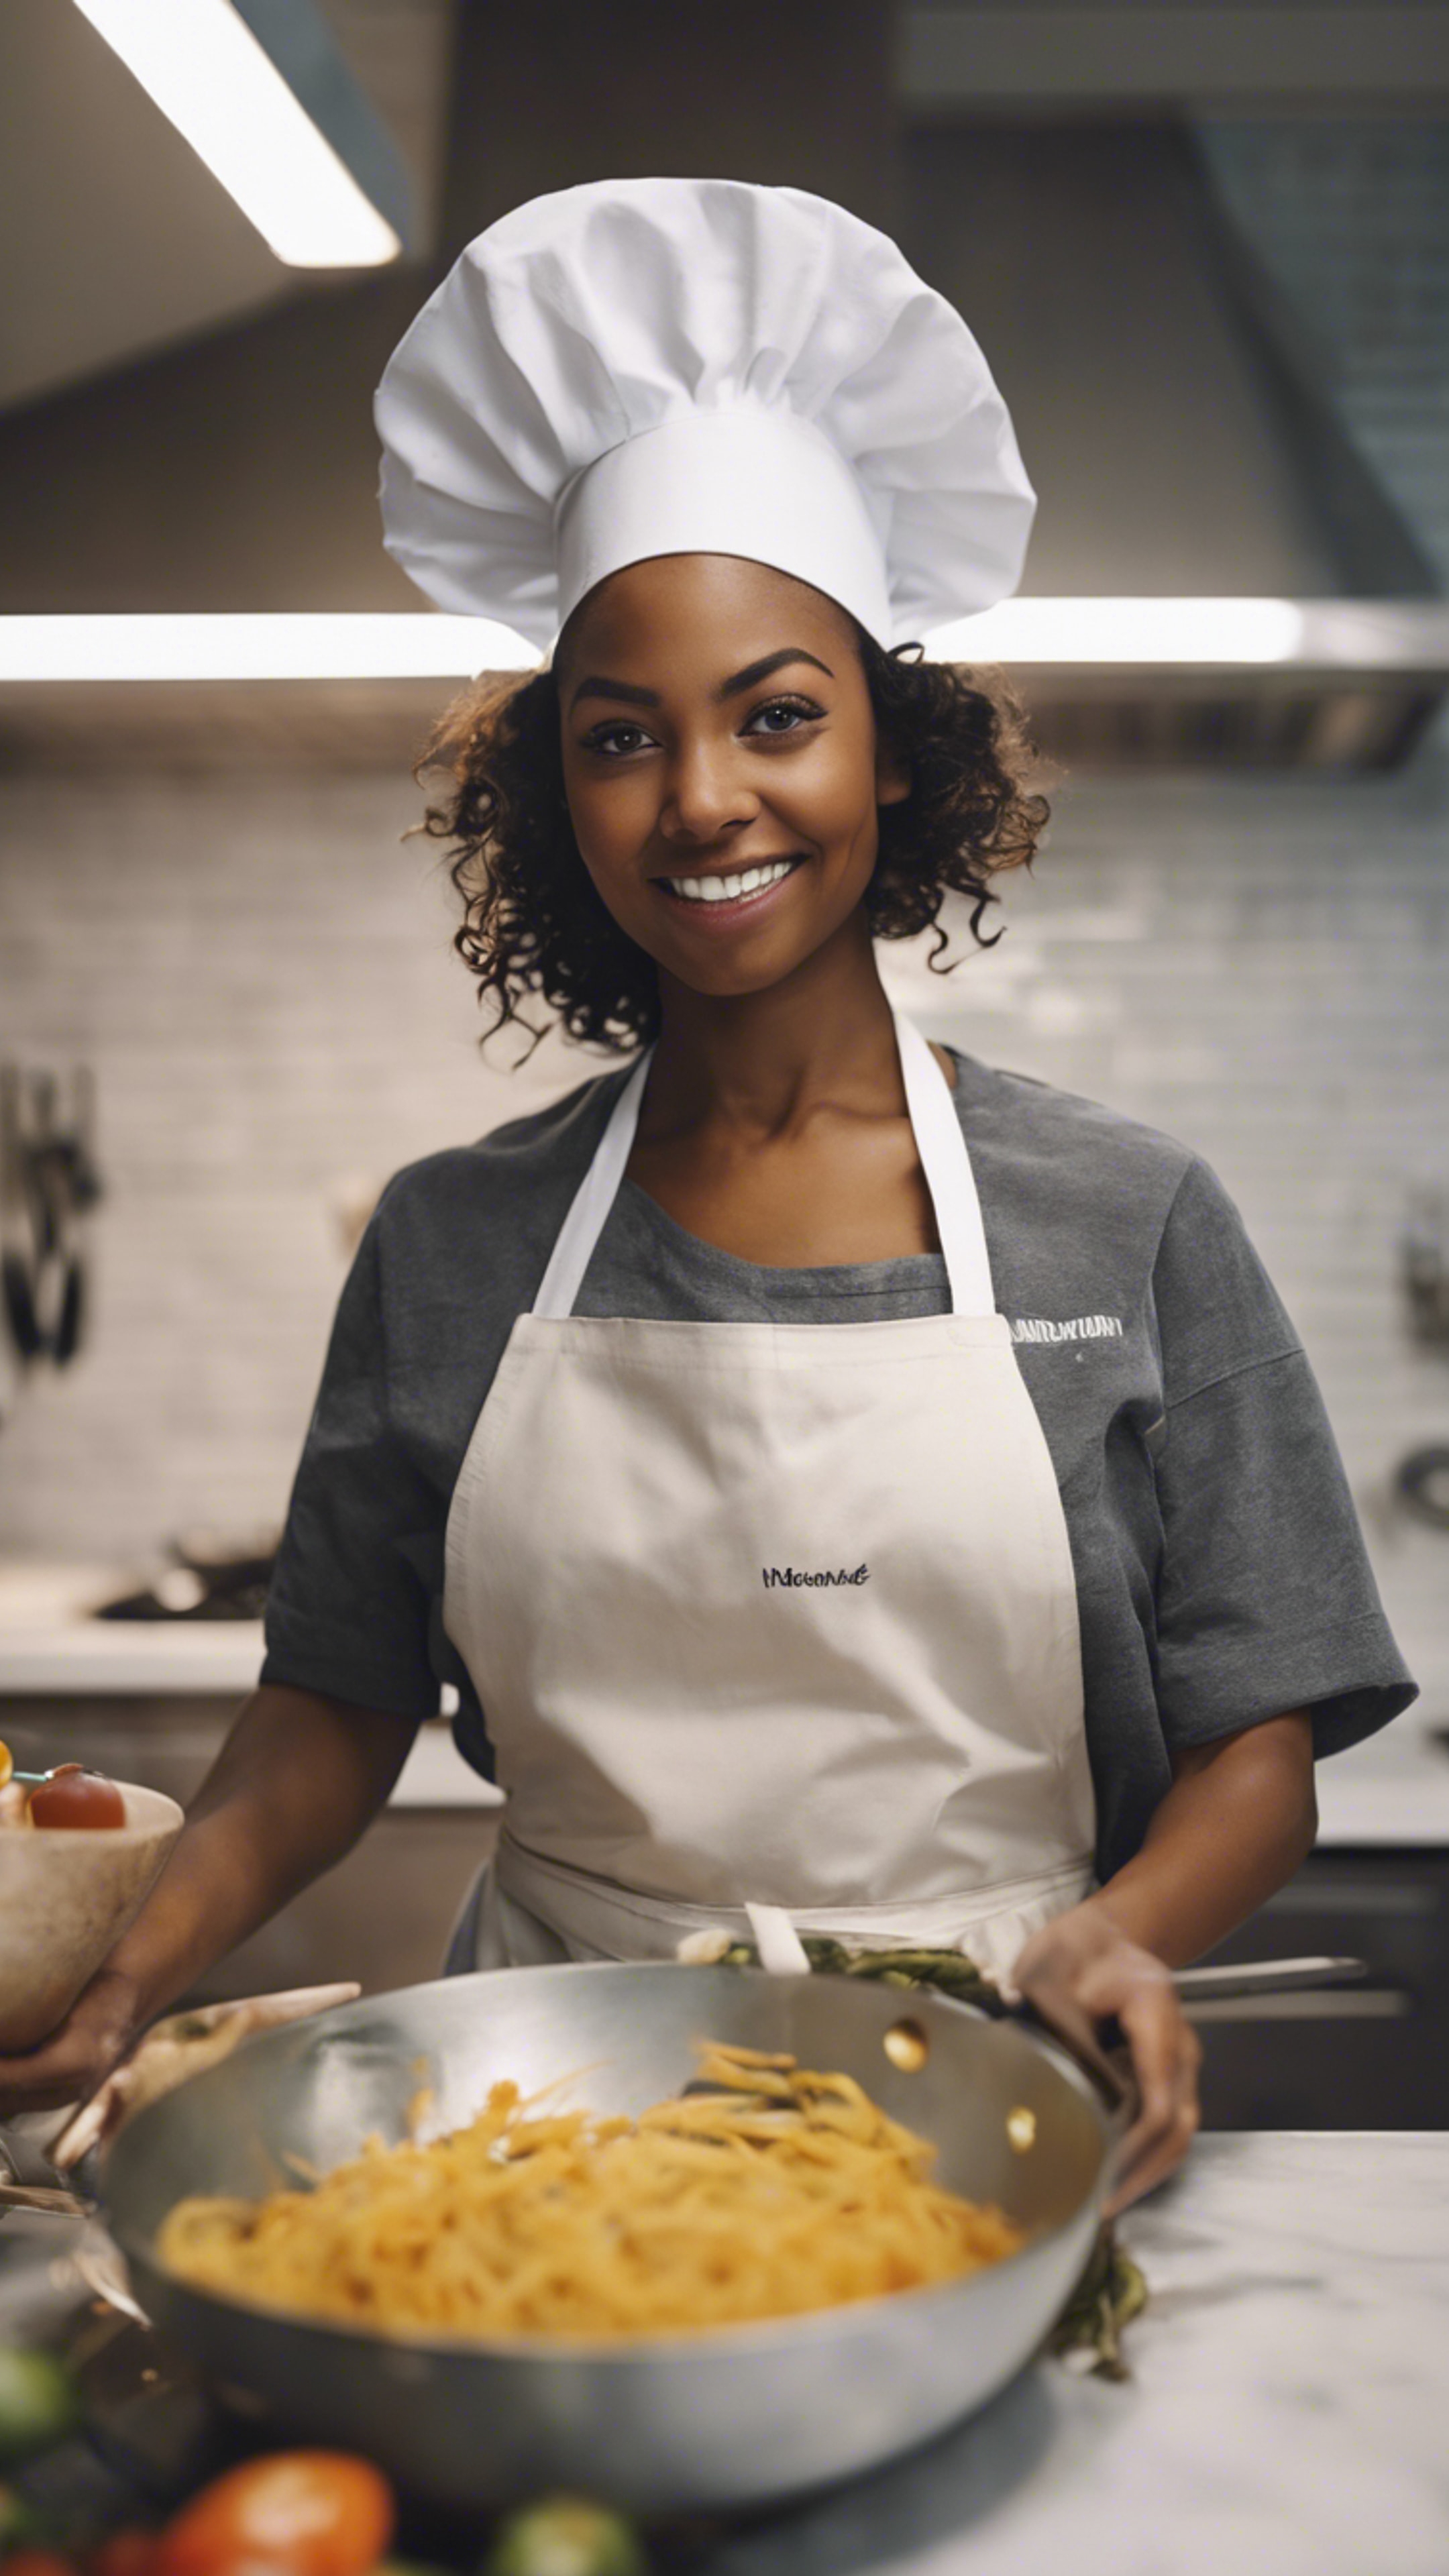 An enthusiastic black girl wearing chef’s hat and apron cooking in a modern kitchen. Тапет[28127f79c89b4e3a826e]